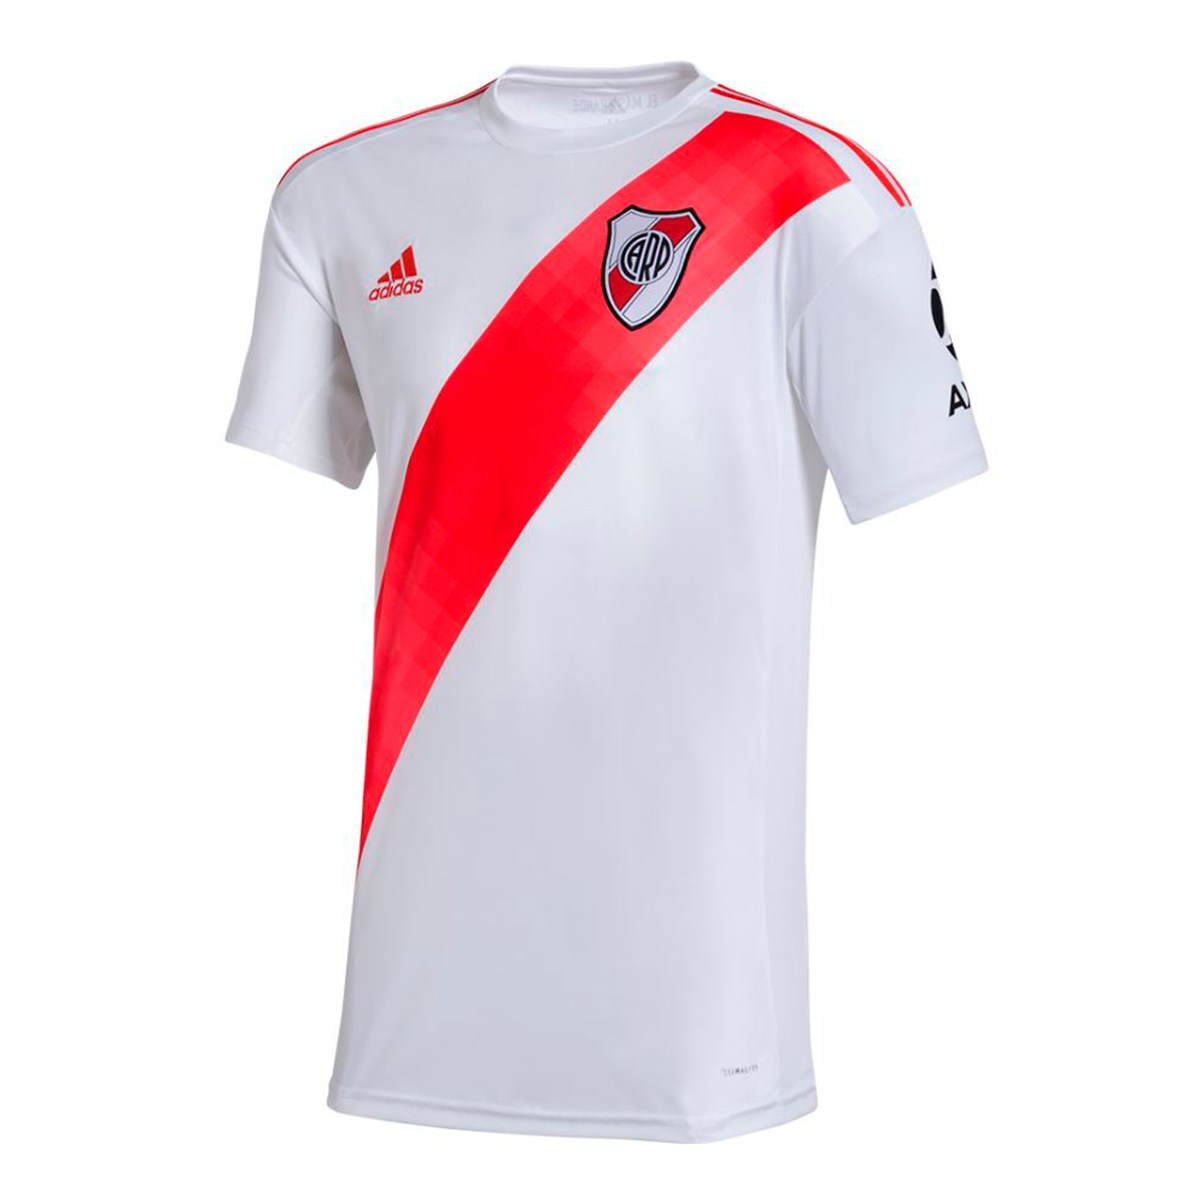 river plate jersey 2020